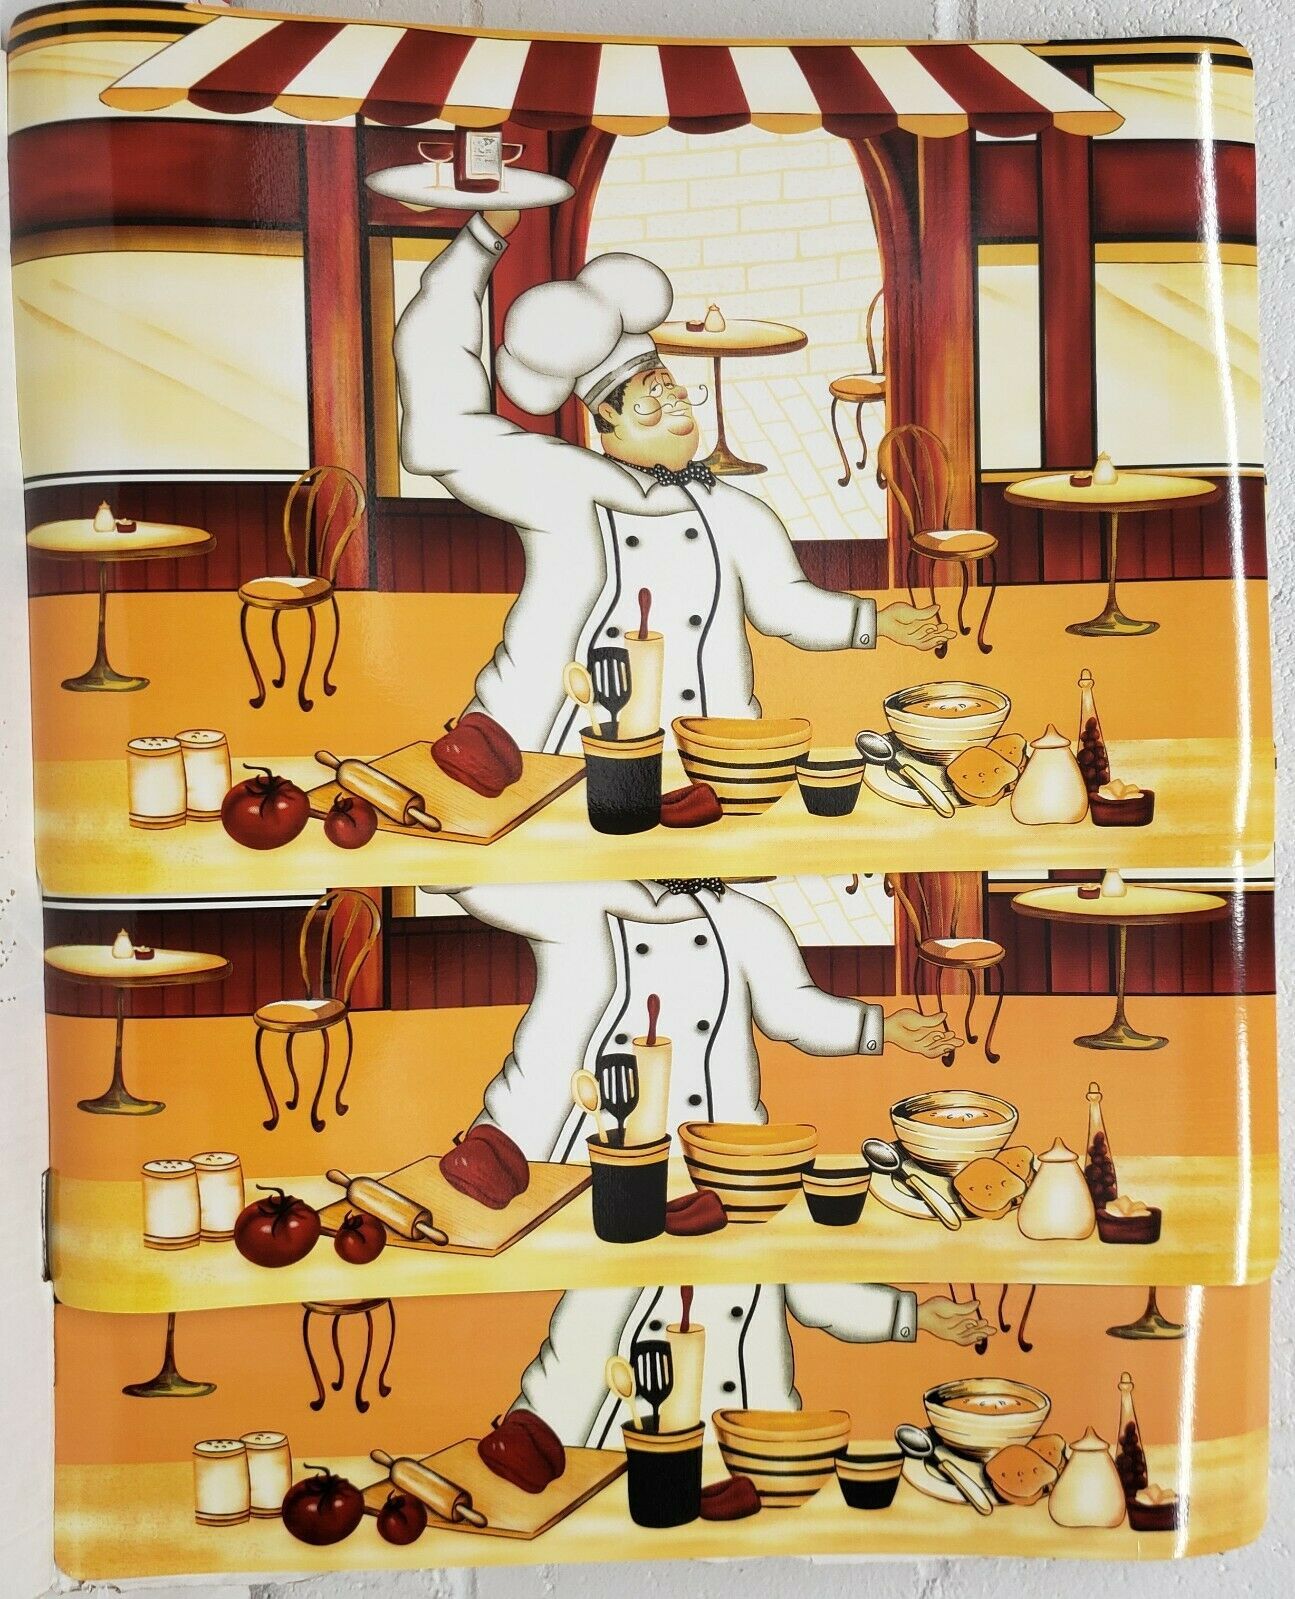 BUON APPETITO BH 3 FAT CHEFS Details about   SET OF 2 PLASTIC SEMI-CLEAR PLACEMATS,12" x 18" 